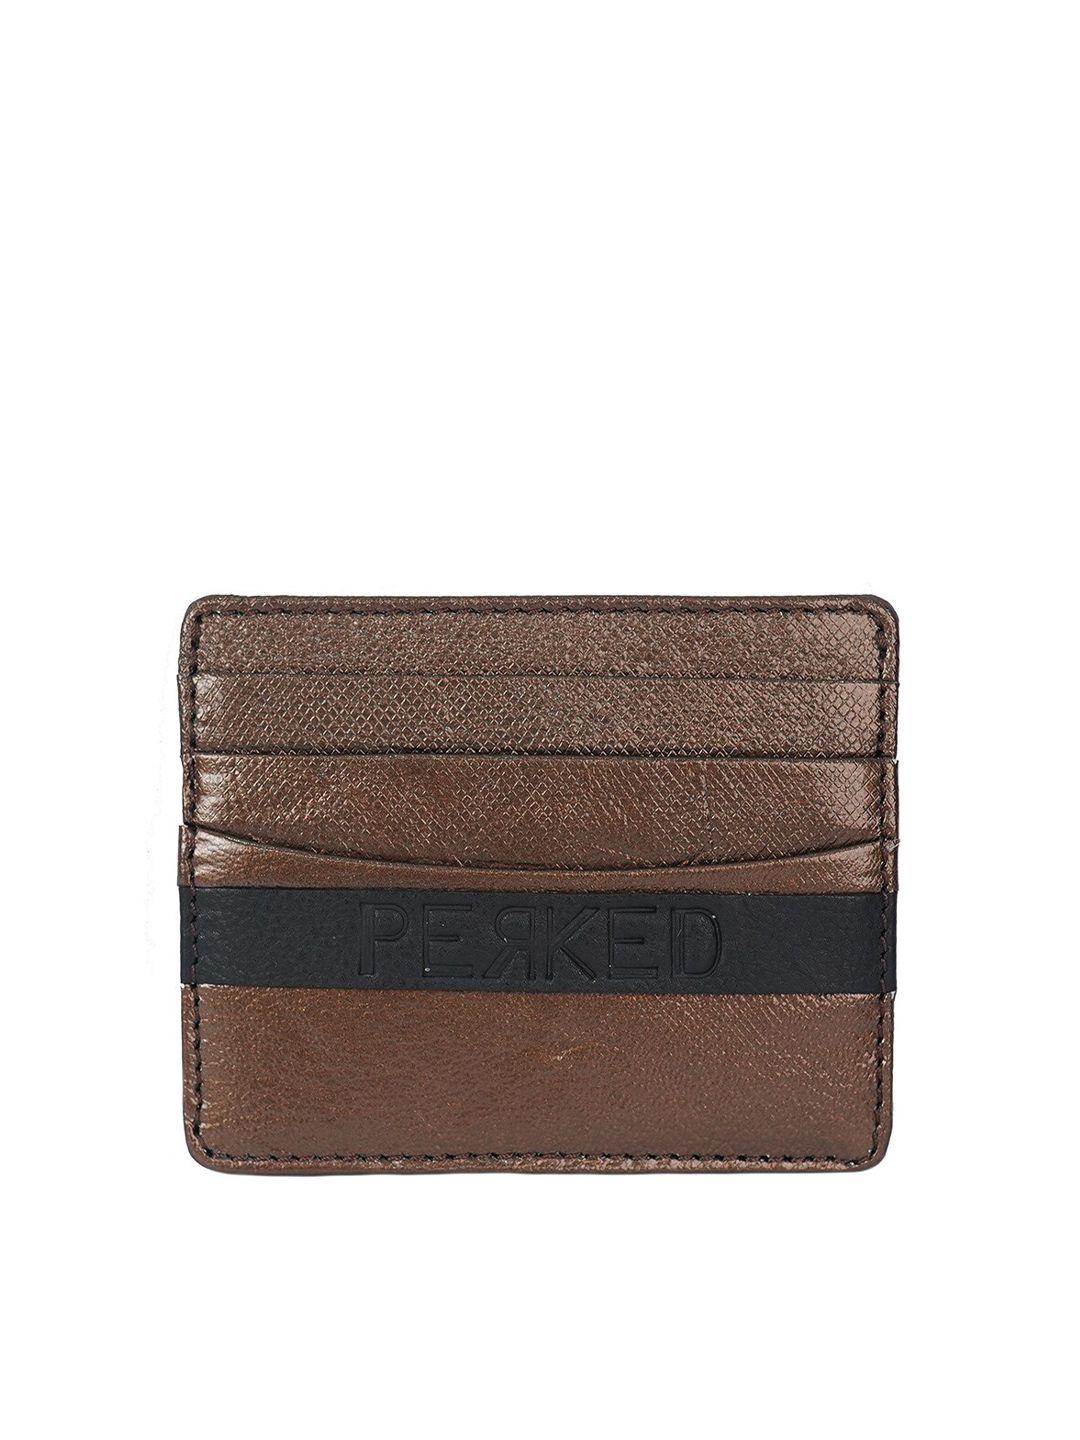 perked copper-toned leather card holder